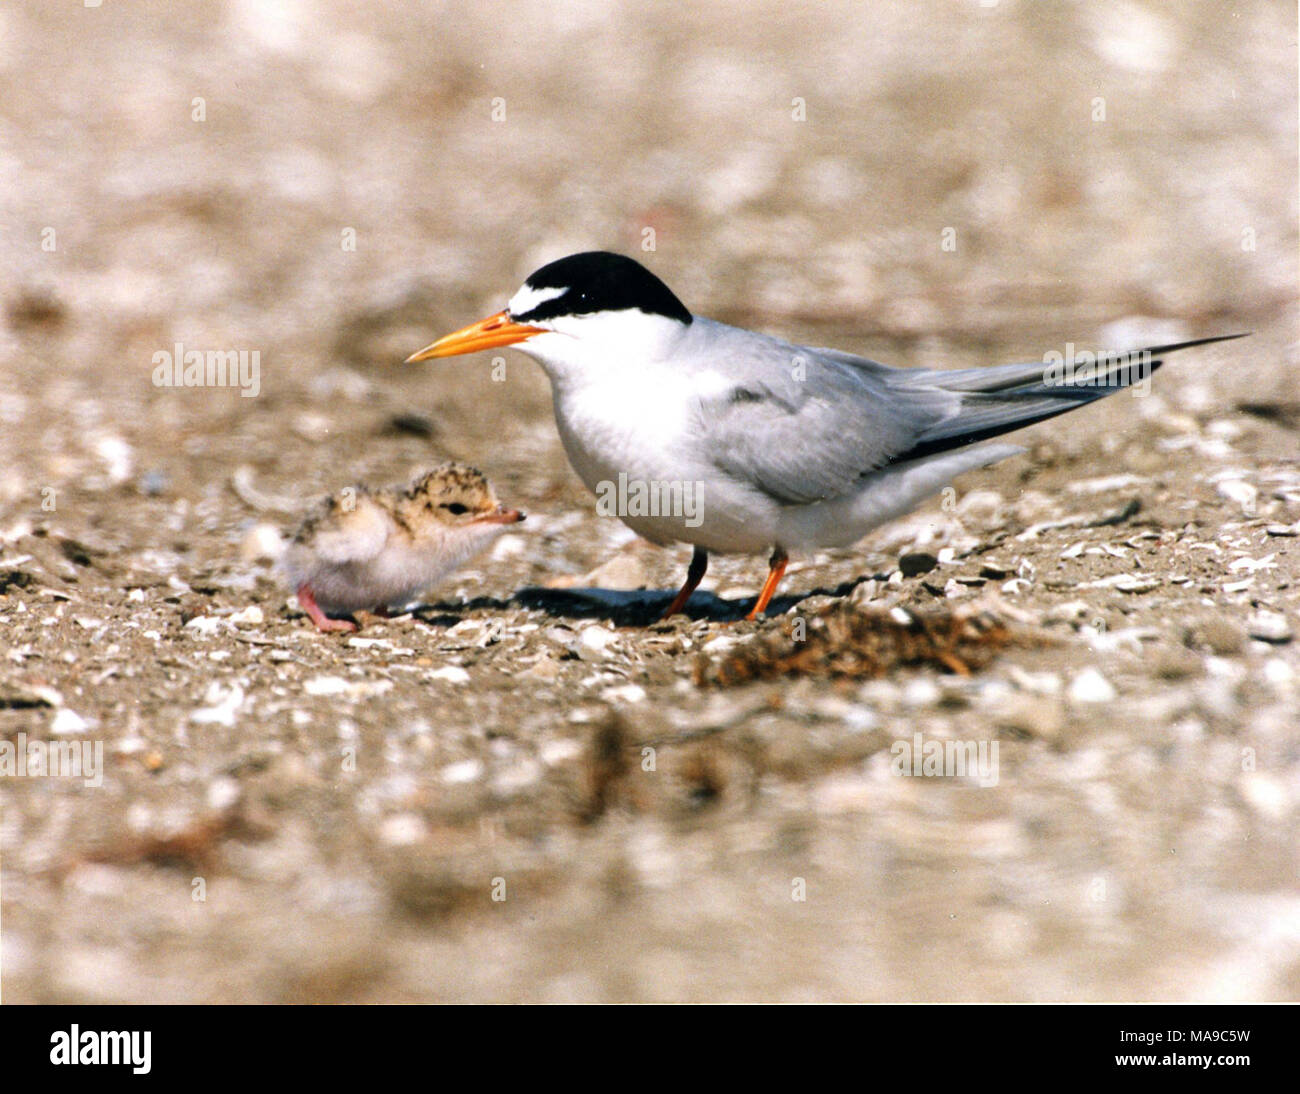 Federally endangered California least tern adult. In 2014, Air Force staff and partners successfully restored 50 acres of coastal beach and dune habitat to benefit at-risk coastal species including the Western snowy plover and California least tern, resulting in a significant increase in nesting success compared to previous years. This coastal restoration effort will expand to around 300 acres through 2019.     In 2014, California least terns were observed in the restored area, teaching their fledglings to fish in the adjacent Santa Ynez River estuary. Stock Photo